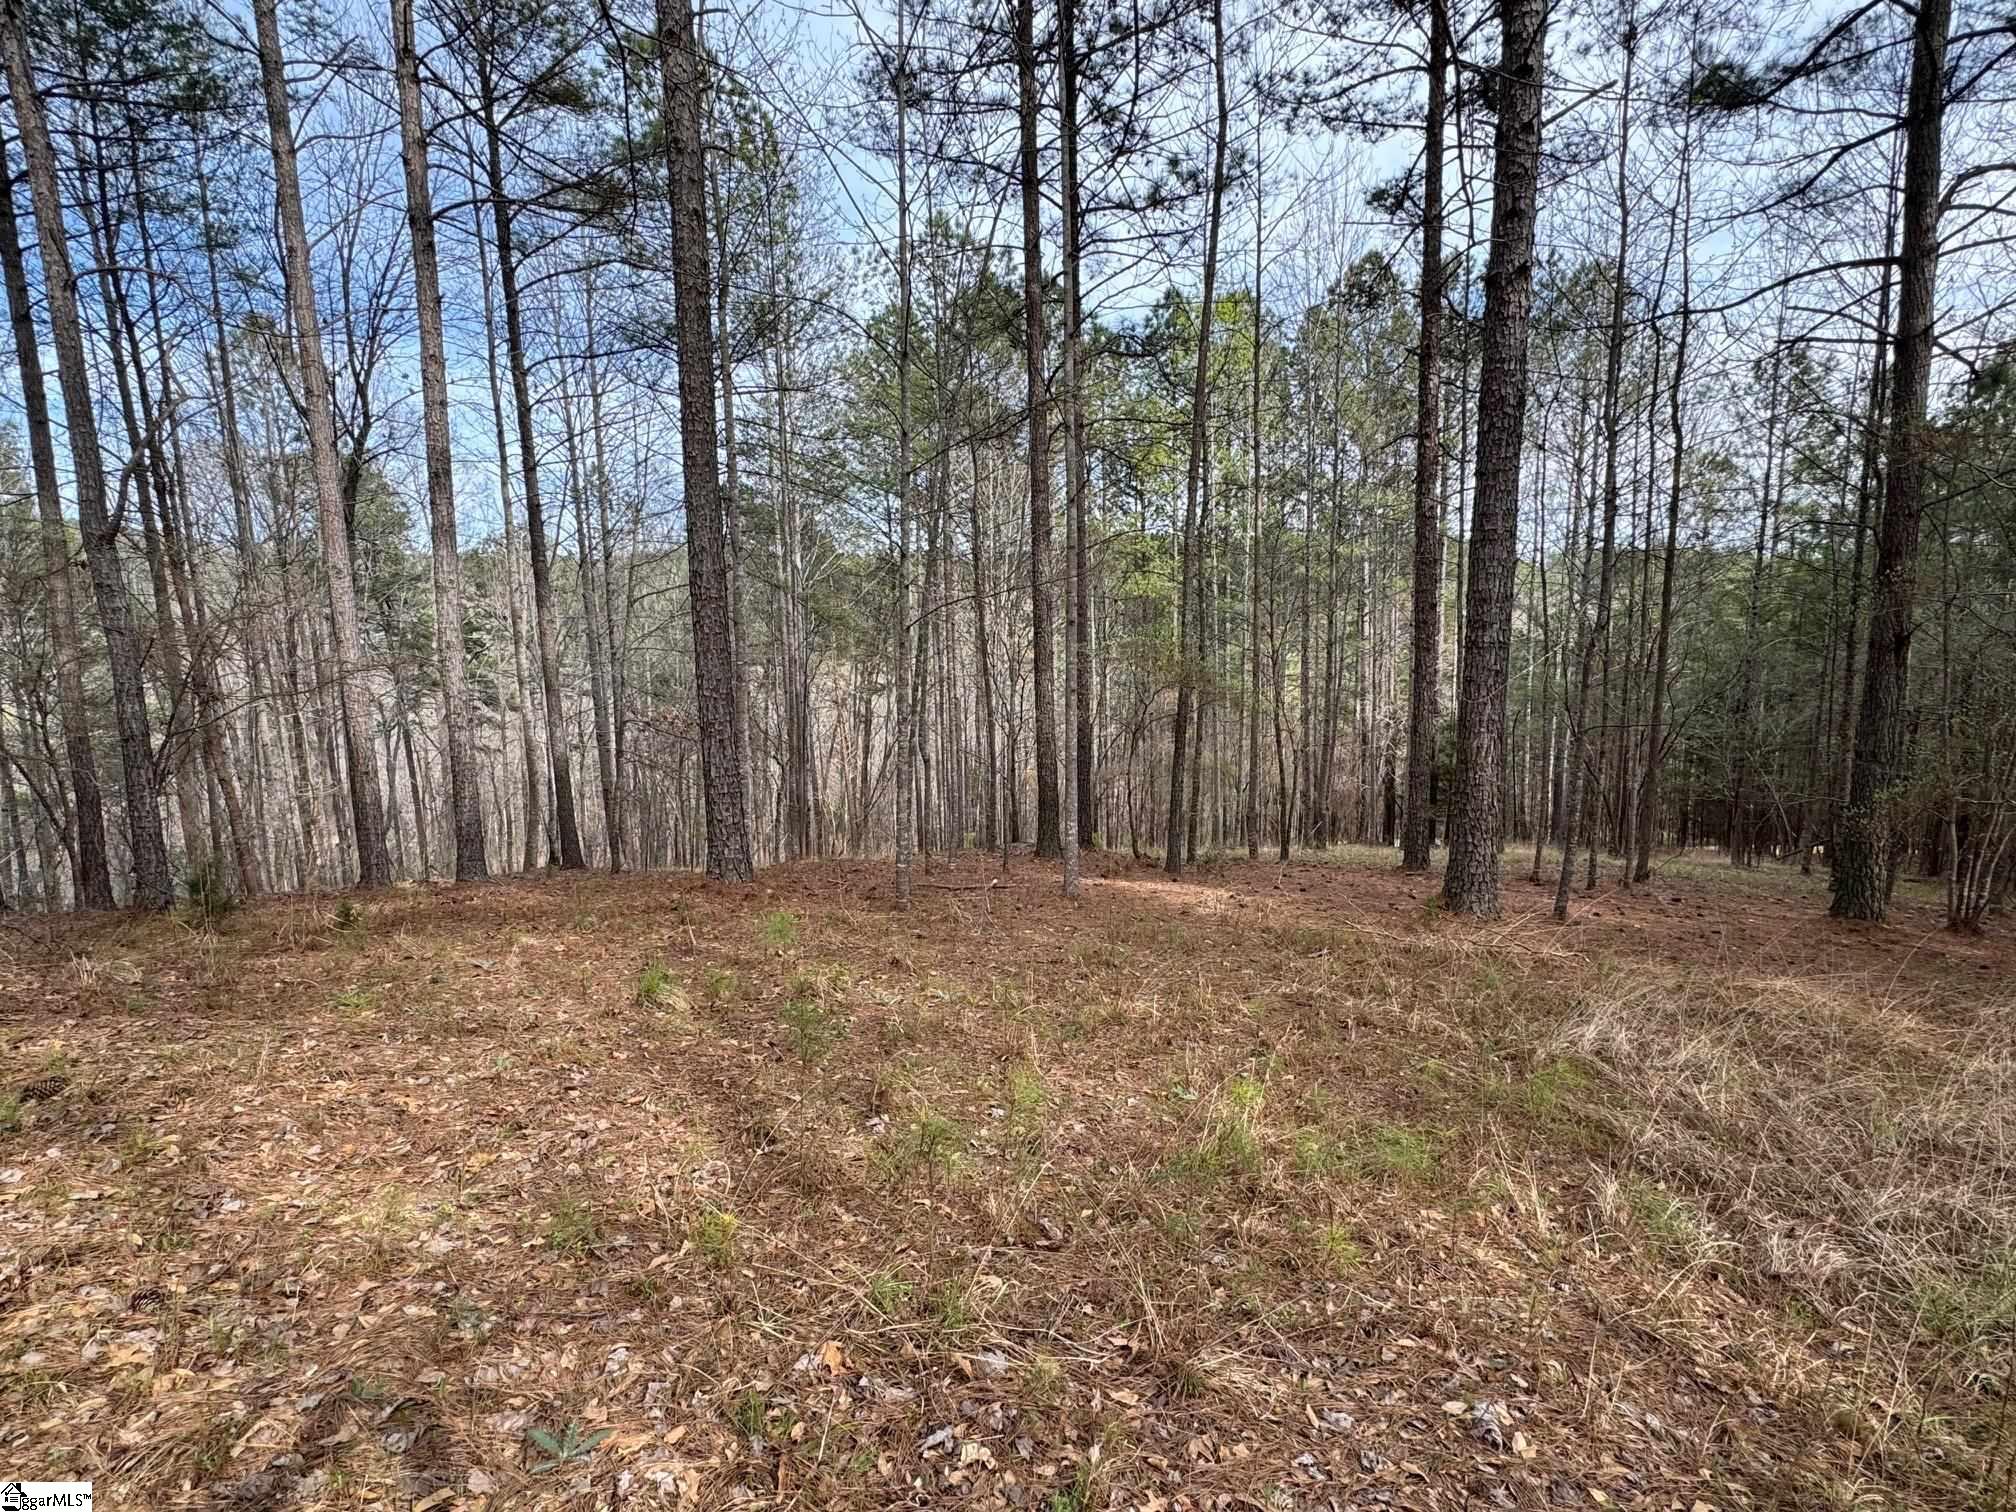 3+ acre estate lot with gentle slope building envelope, privacy, and beautiful hardwoods . This lot is less than 1/2 mile inside the main Springs gate affording easy access and egress to community amenities as well as nearby towns, only 15 minutes to Clemson. Great lot for a home and access to the many amenities offered by the Cliffs at Keowee Springs, including the new clubhouse, beach club, sportsman's trail, and other amenities.   If seeking even larger estate parcel, call listing agent about adjoining lots.  Cliffs membership available for separate purchase.